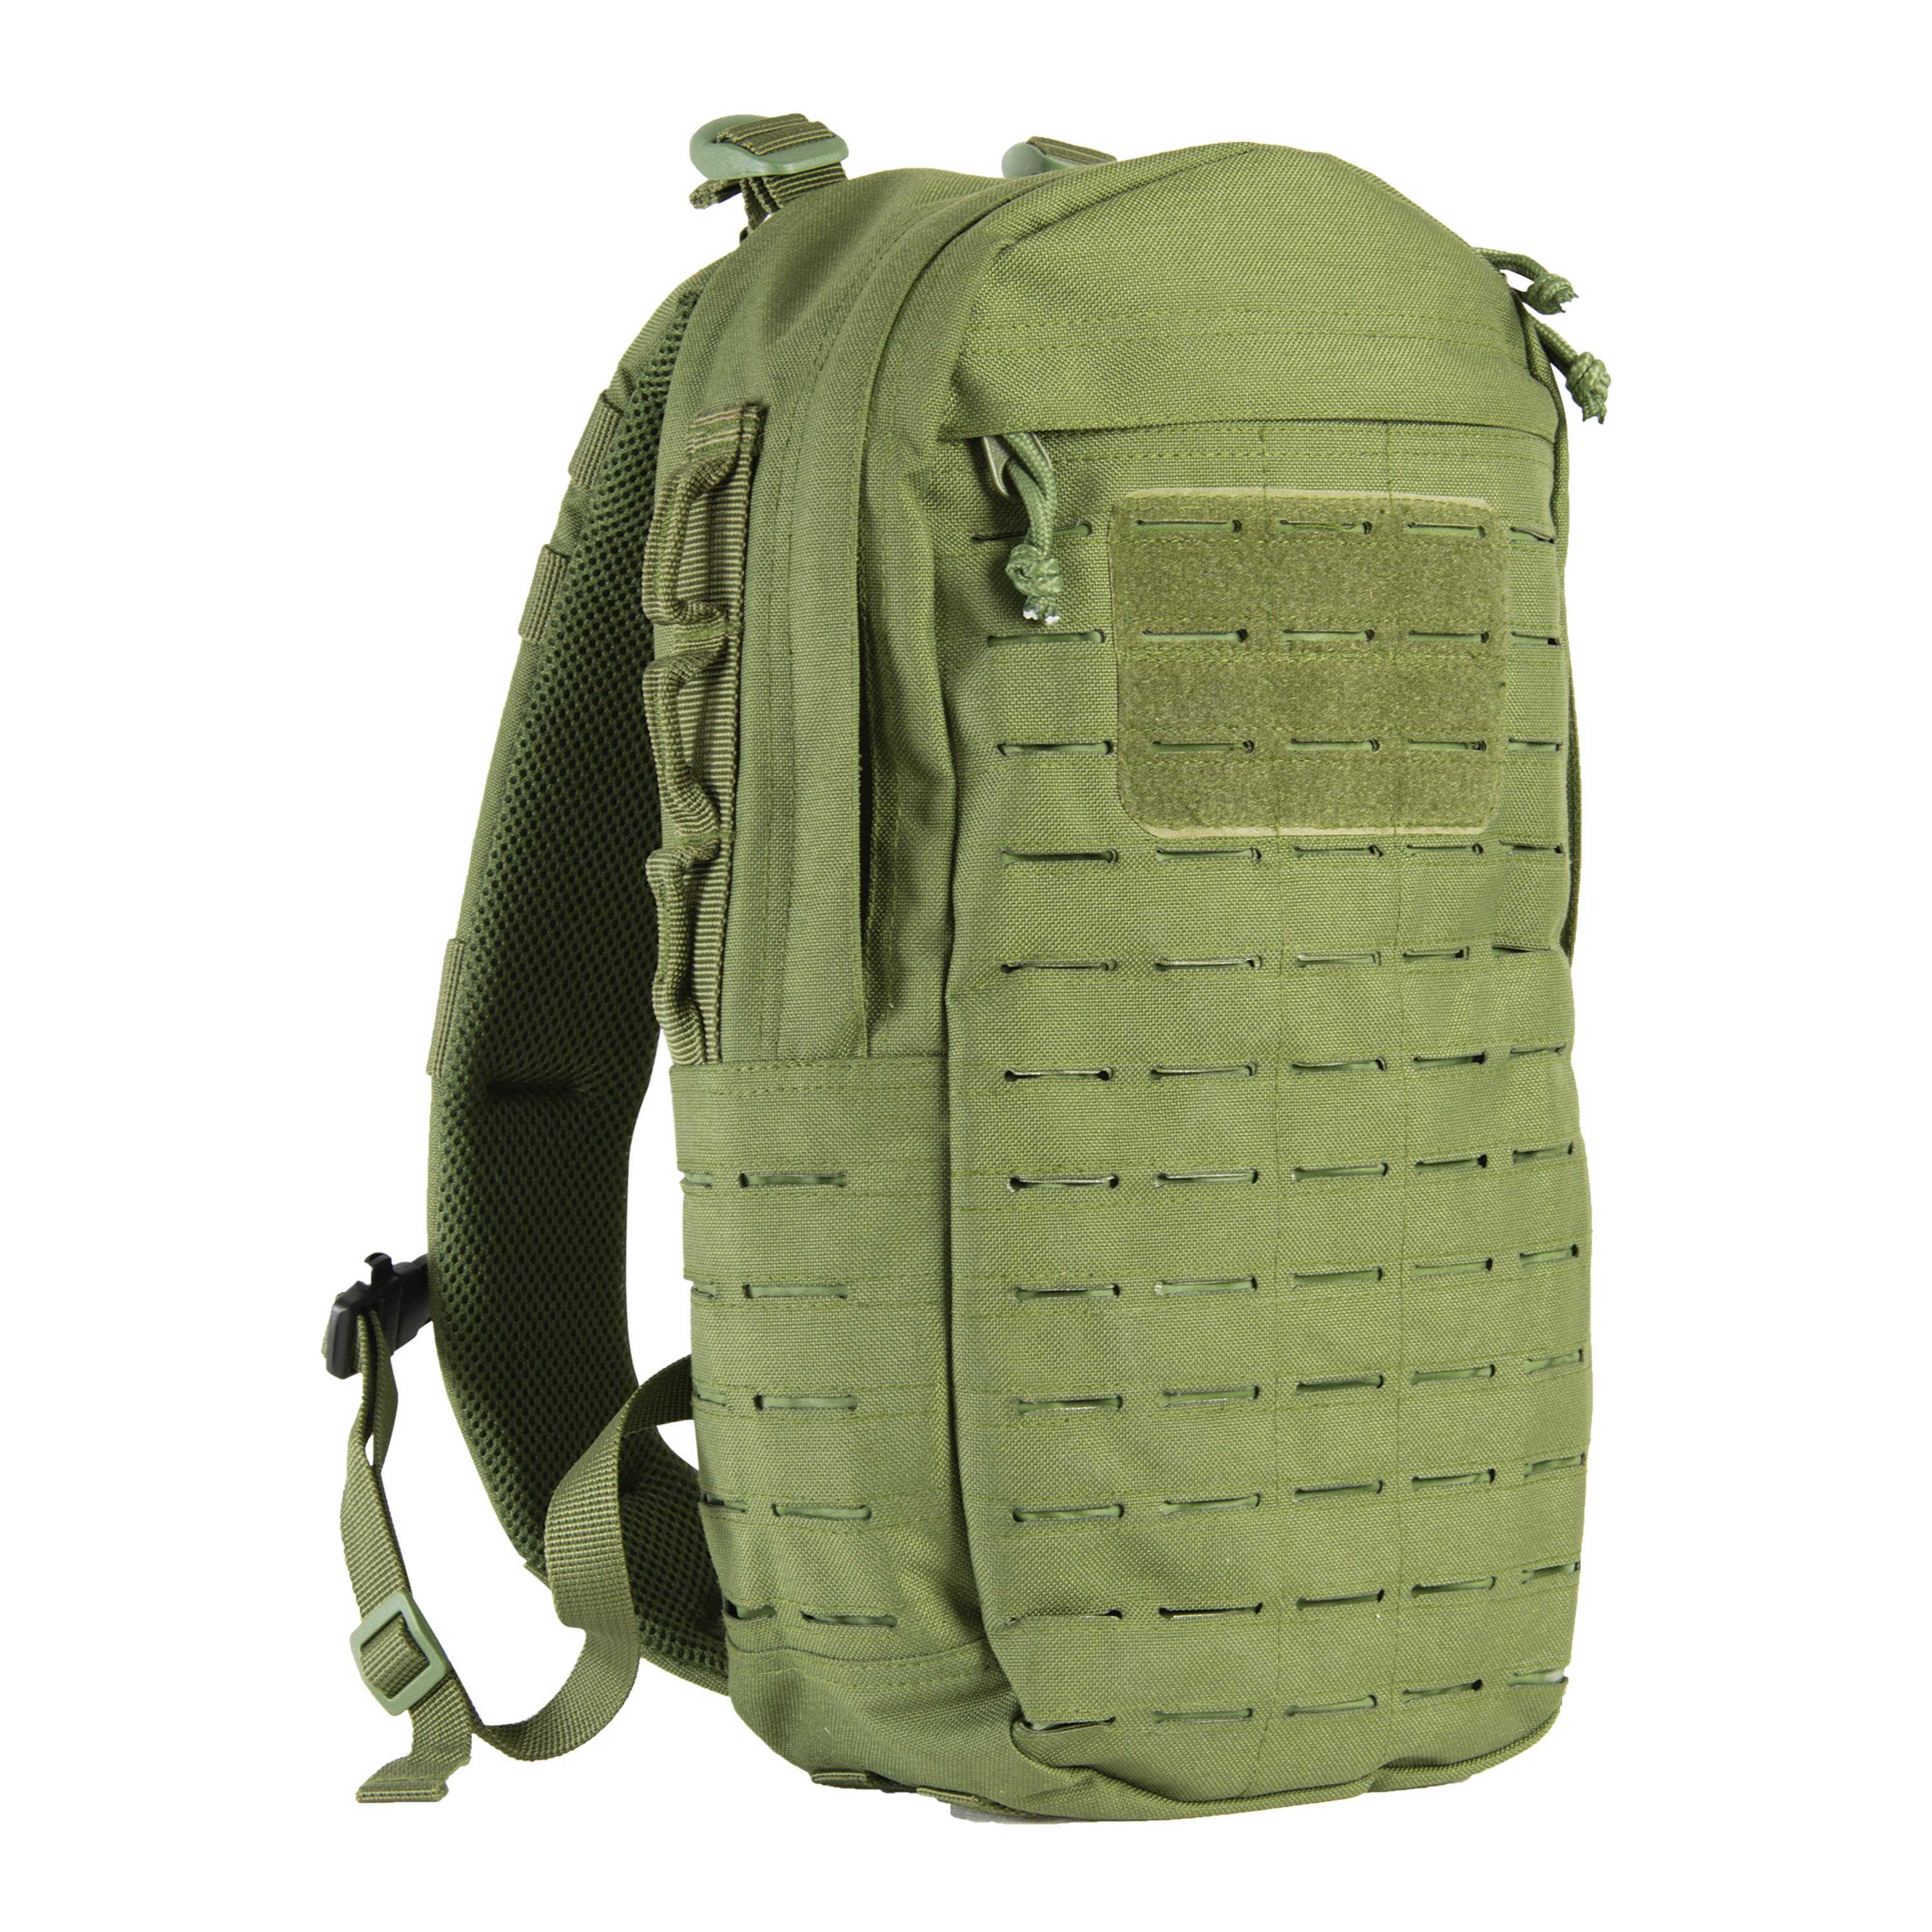 NEW Highlander Military Army Cobra Single Strap Pack Outdoor Hiking Camping 